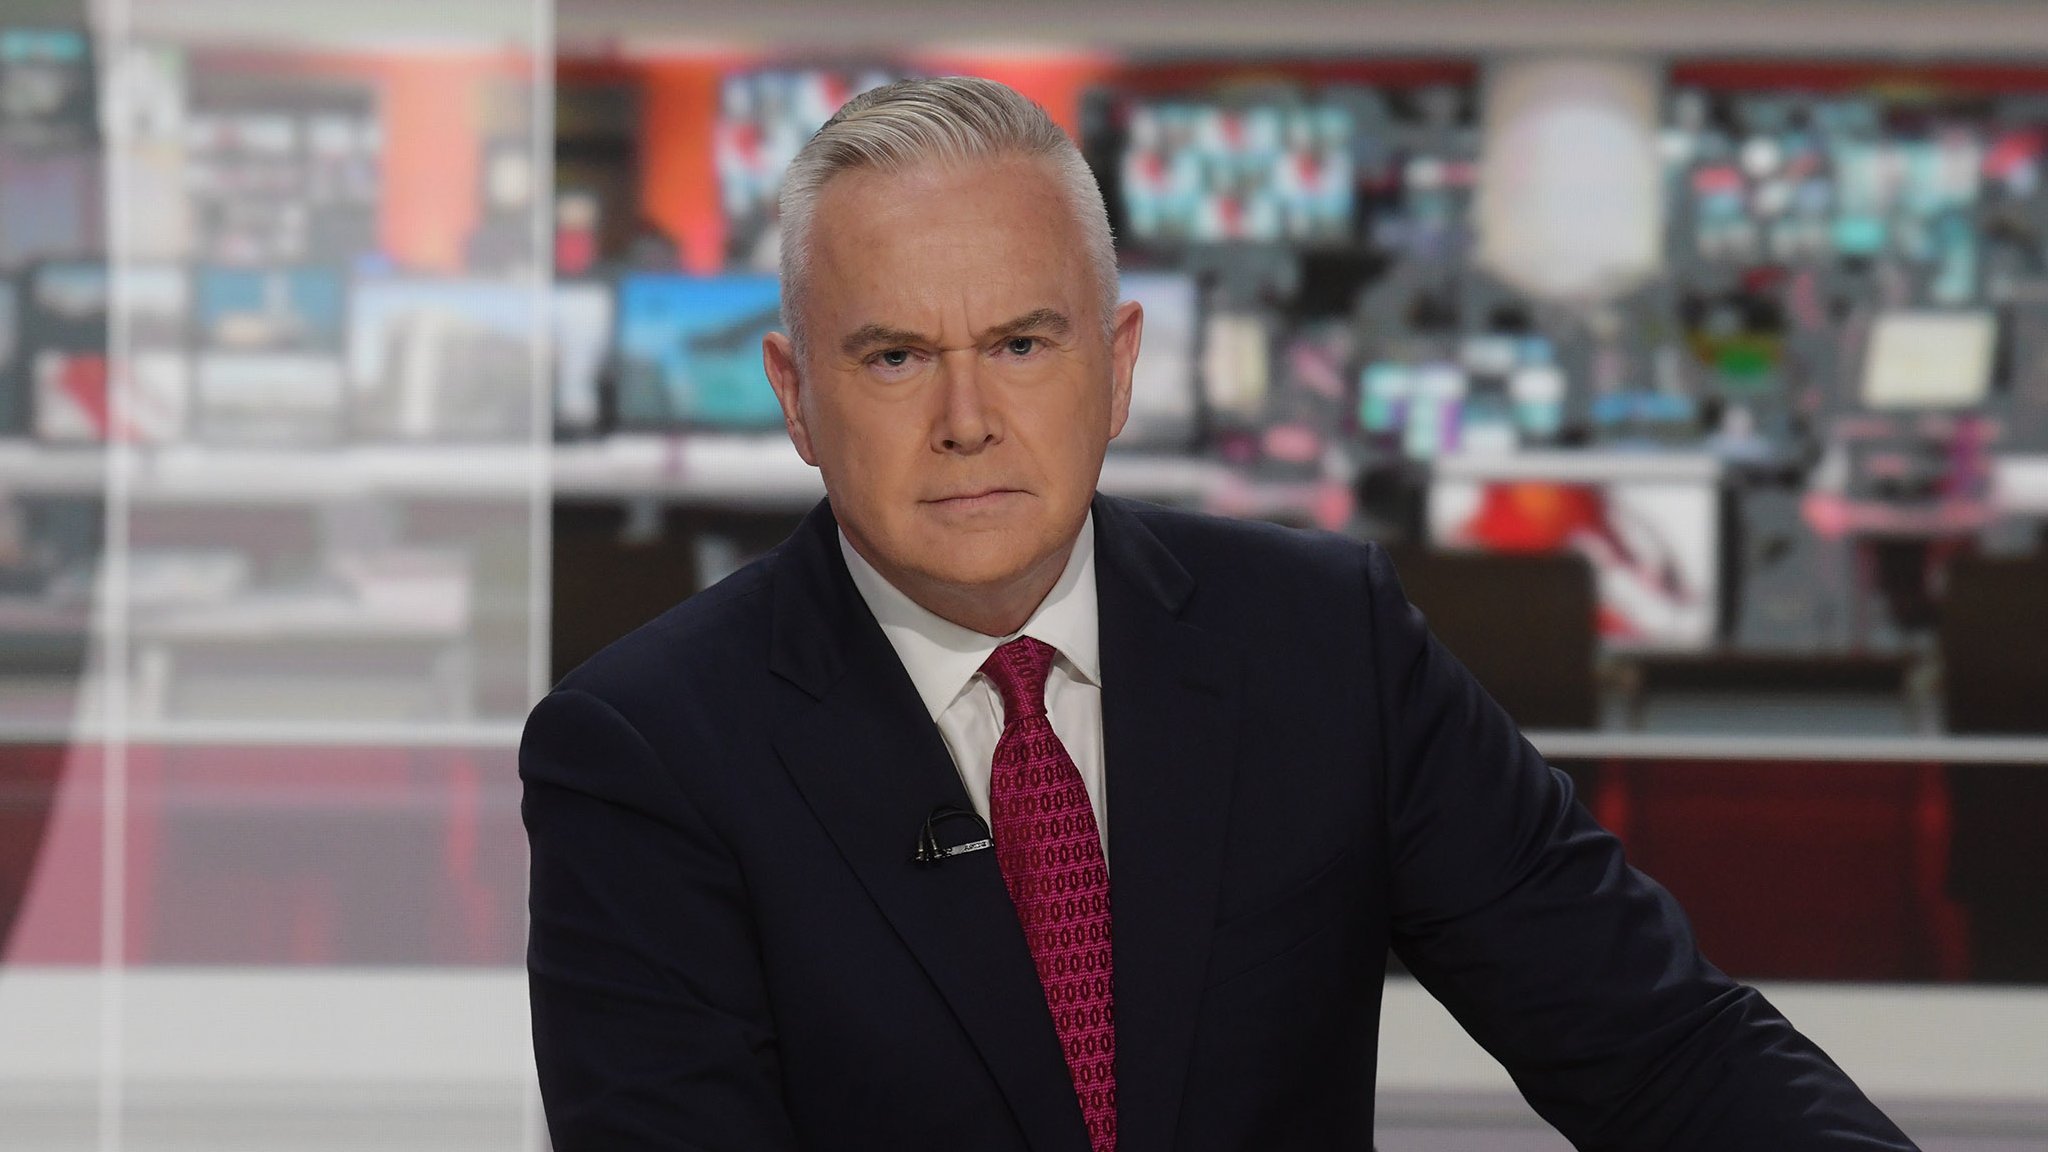 Explained Huw Edwards and the media scandal gripping the UK photo